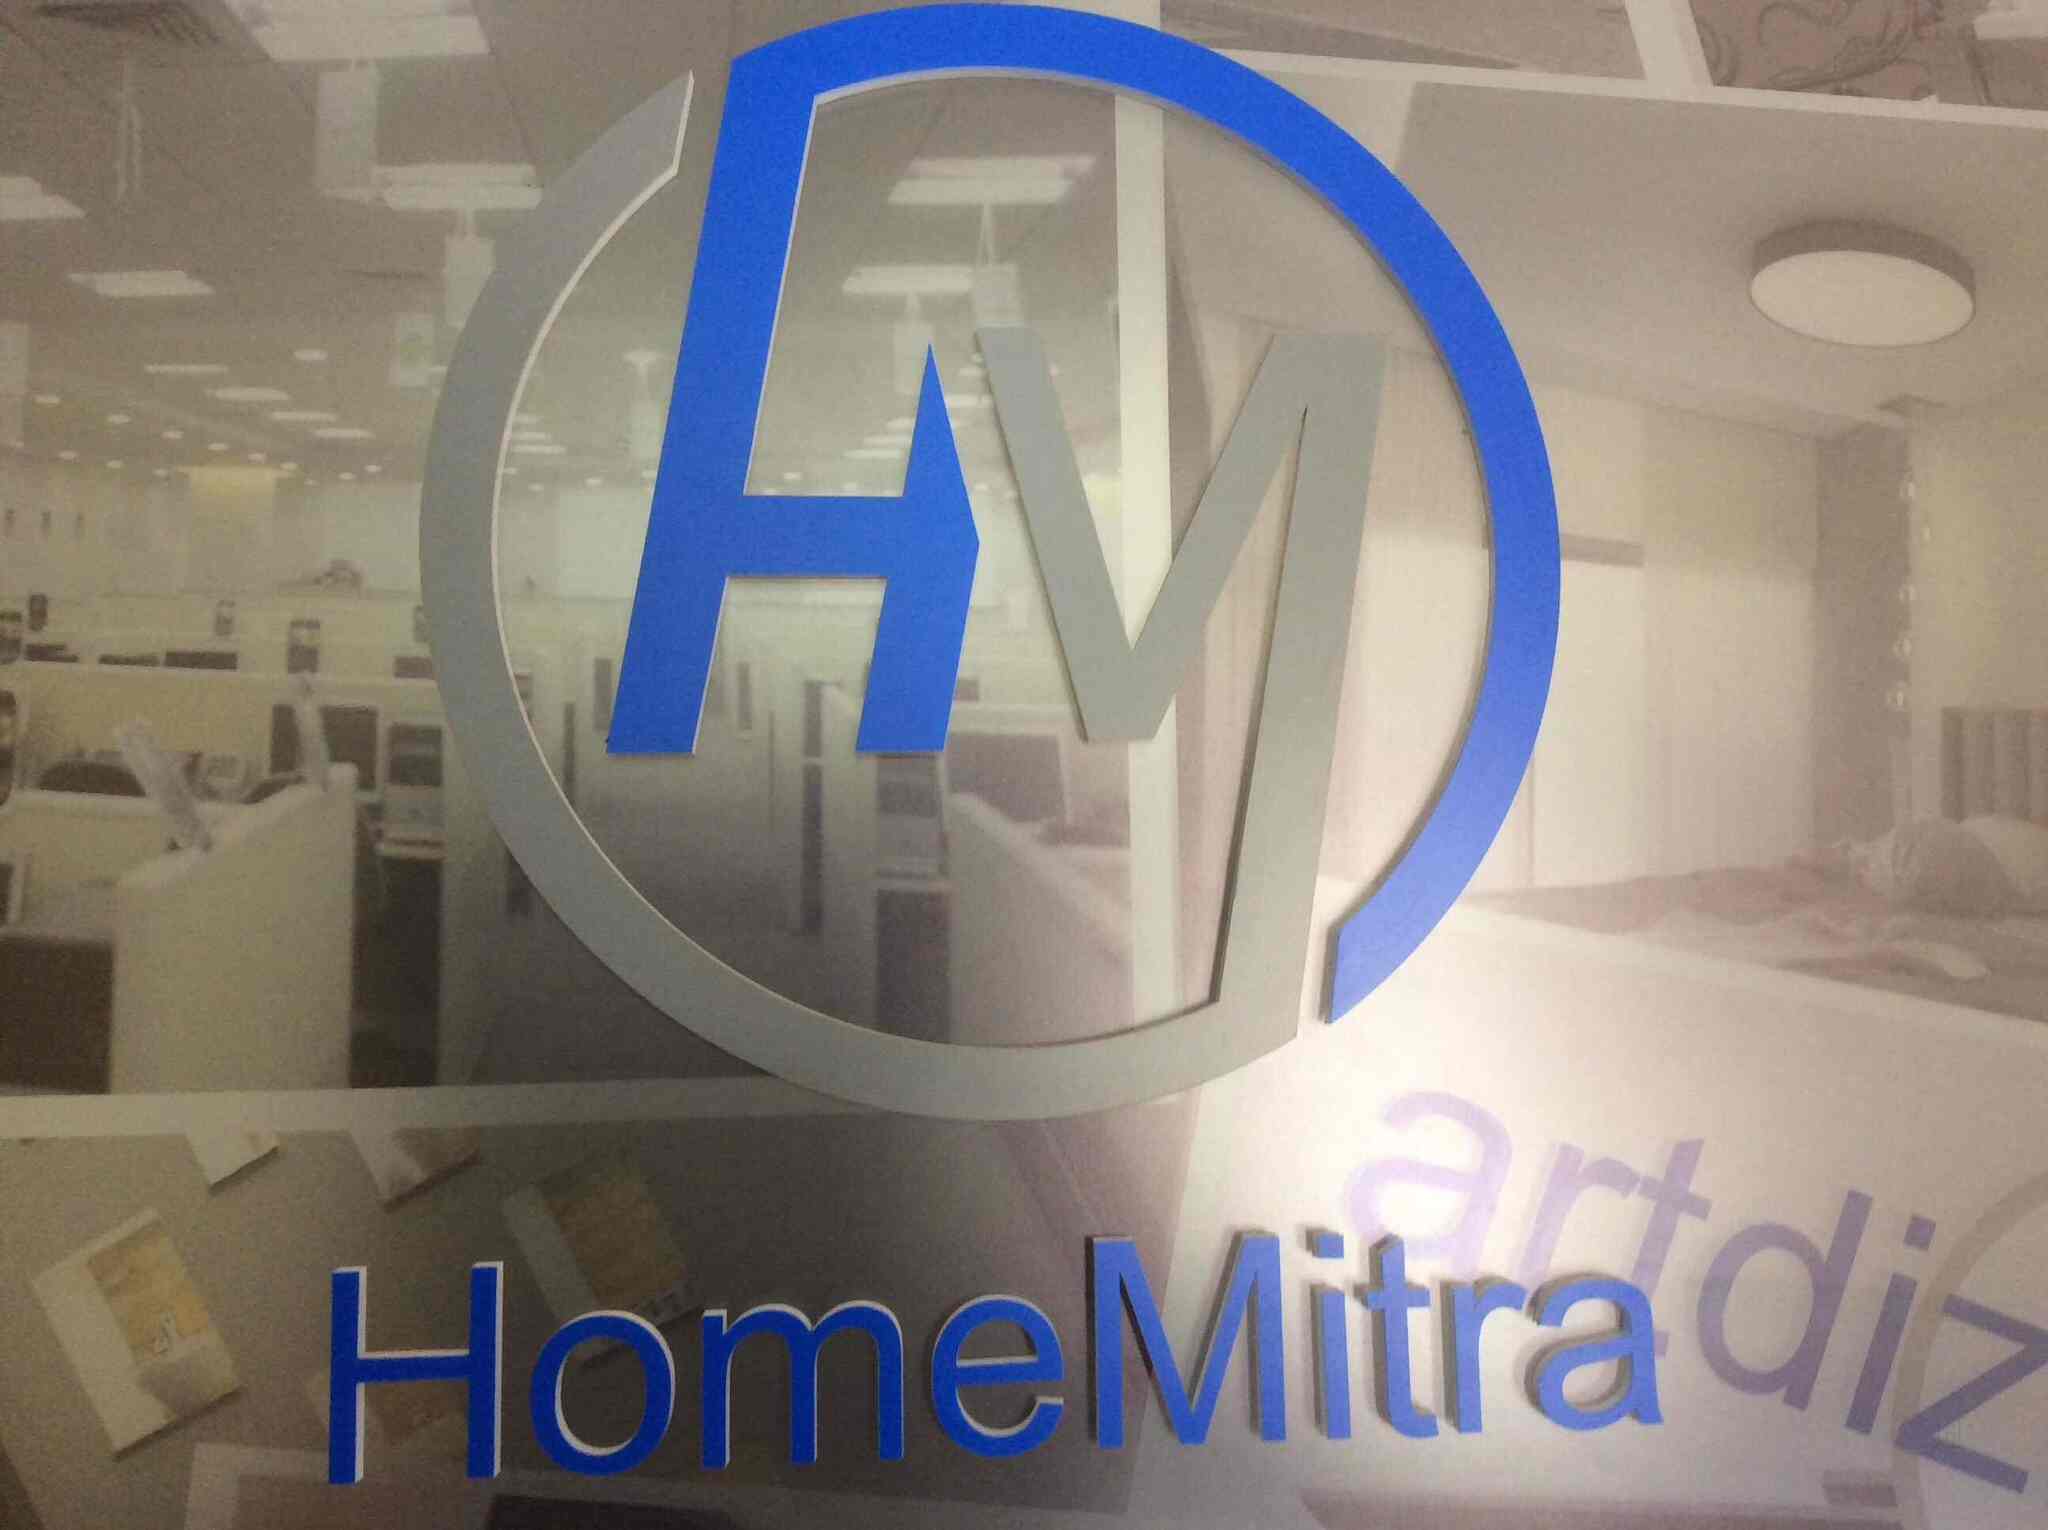 Home - Mitra